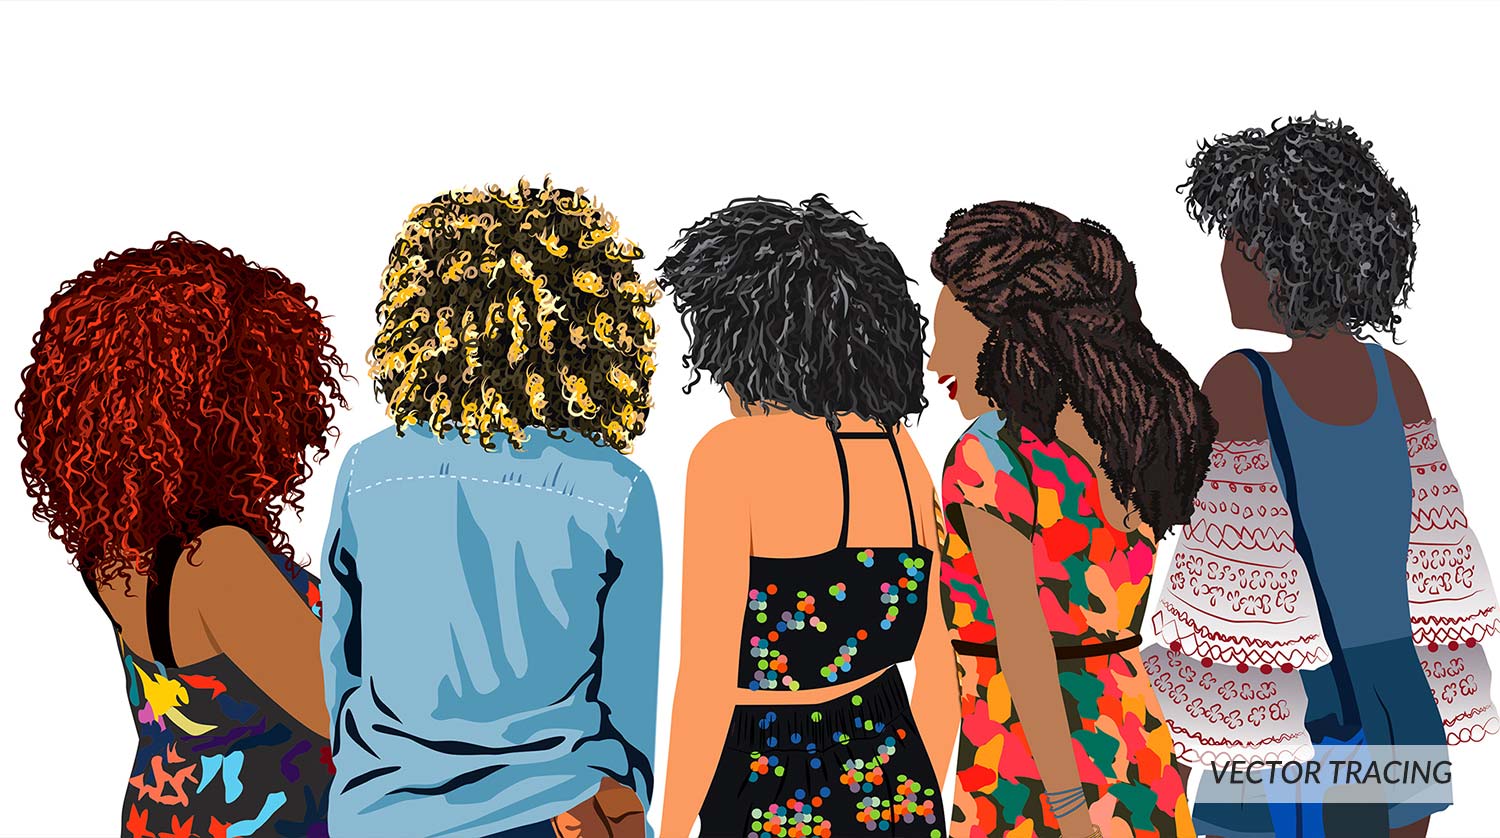 Afro American Girls half body image showing there hair styles